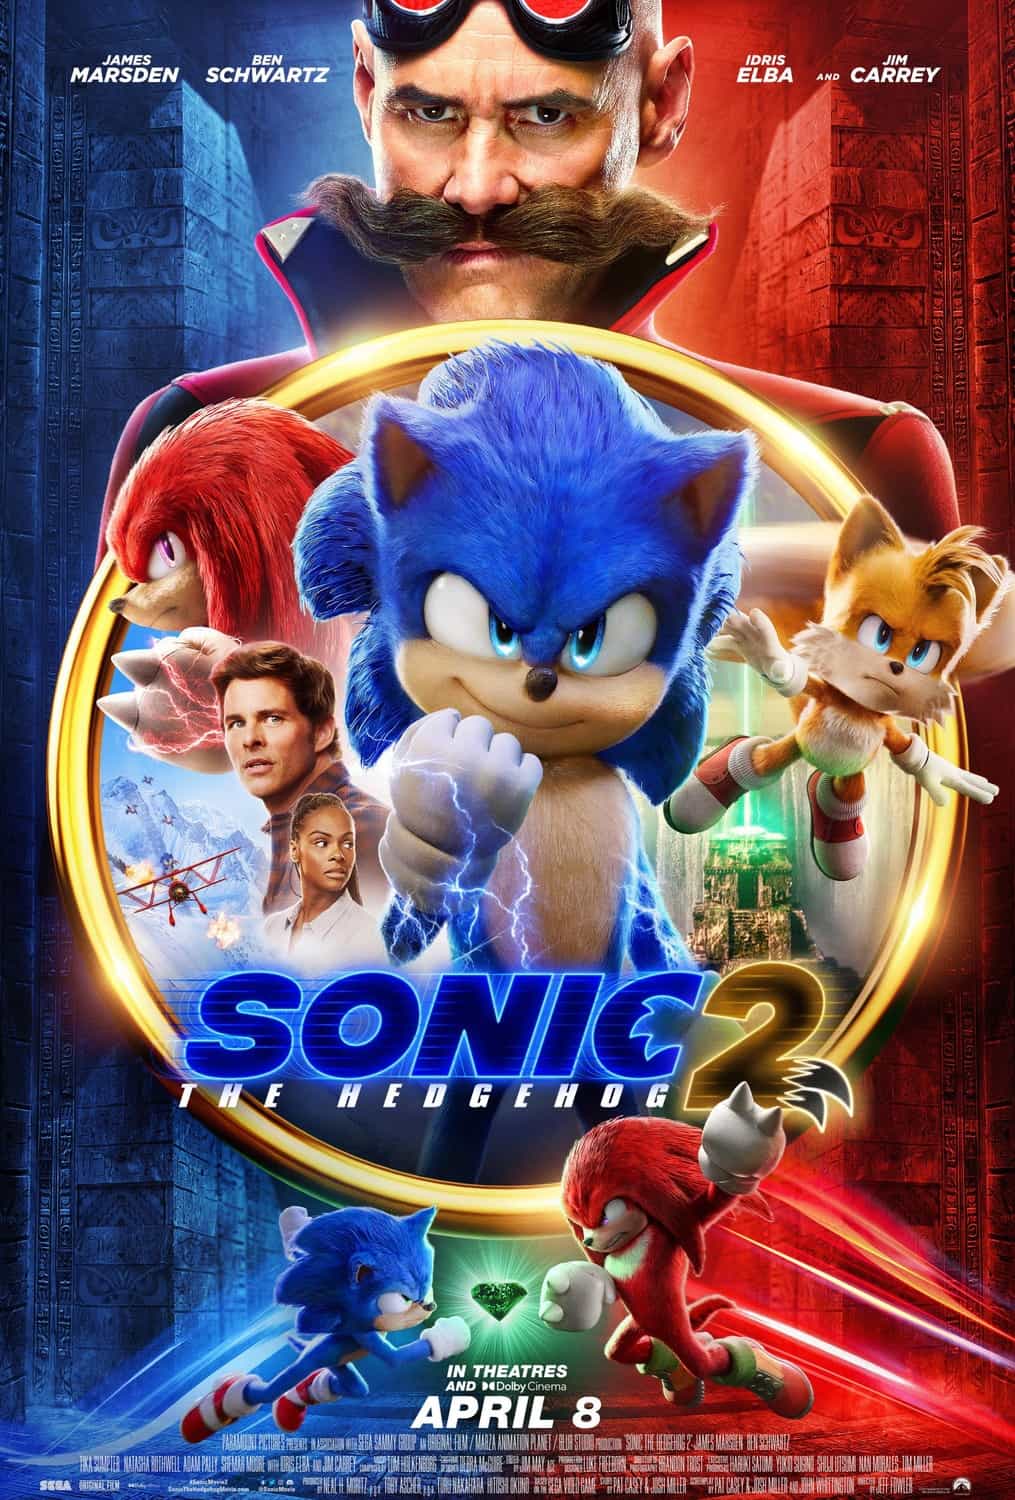 First trailer for upcoming sequel movie Sonic the Hedgehog 2 is released